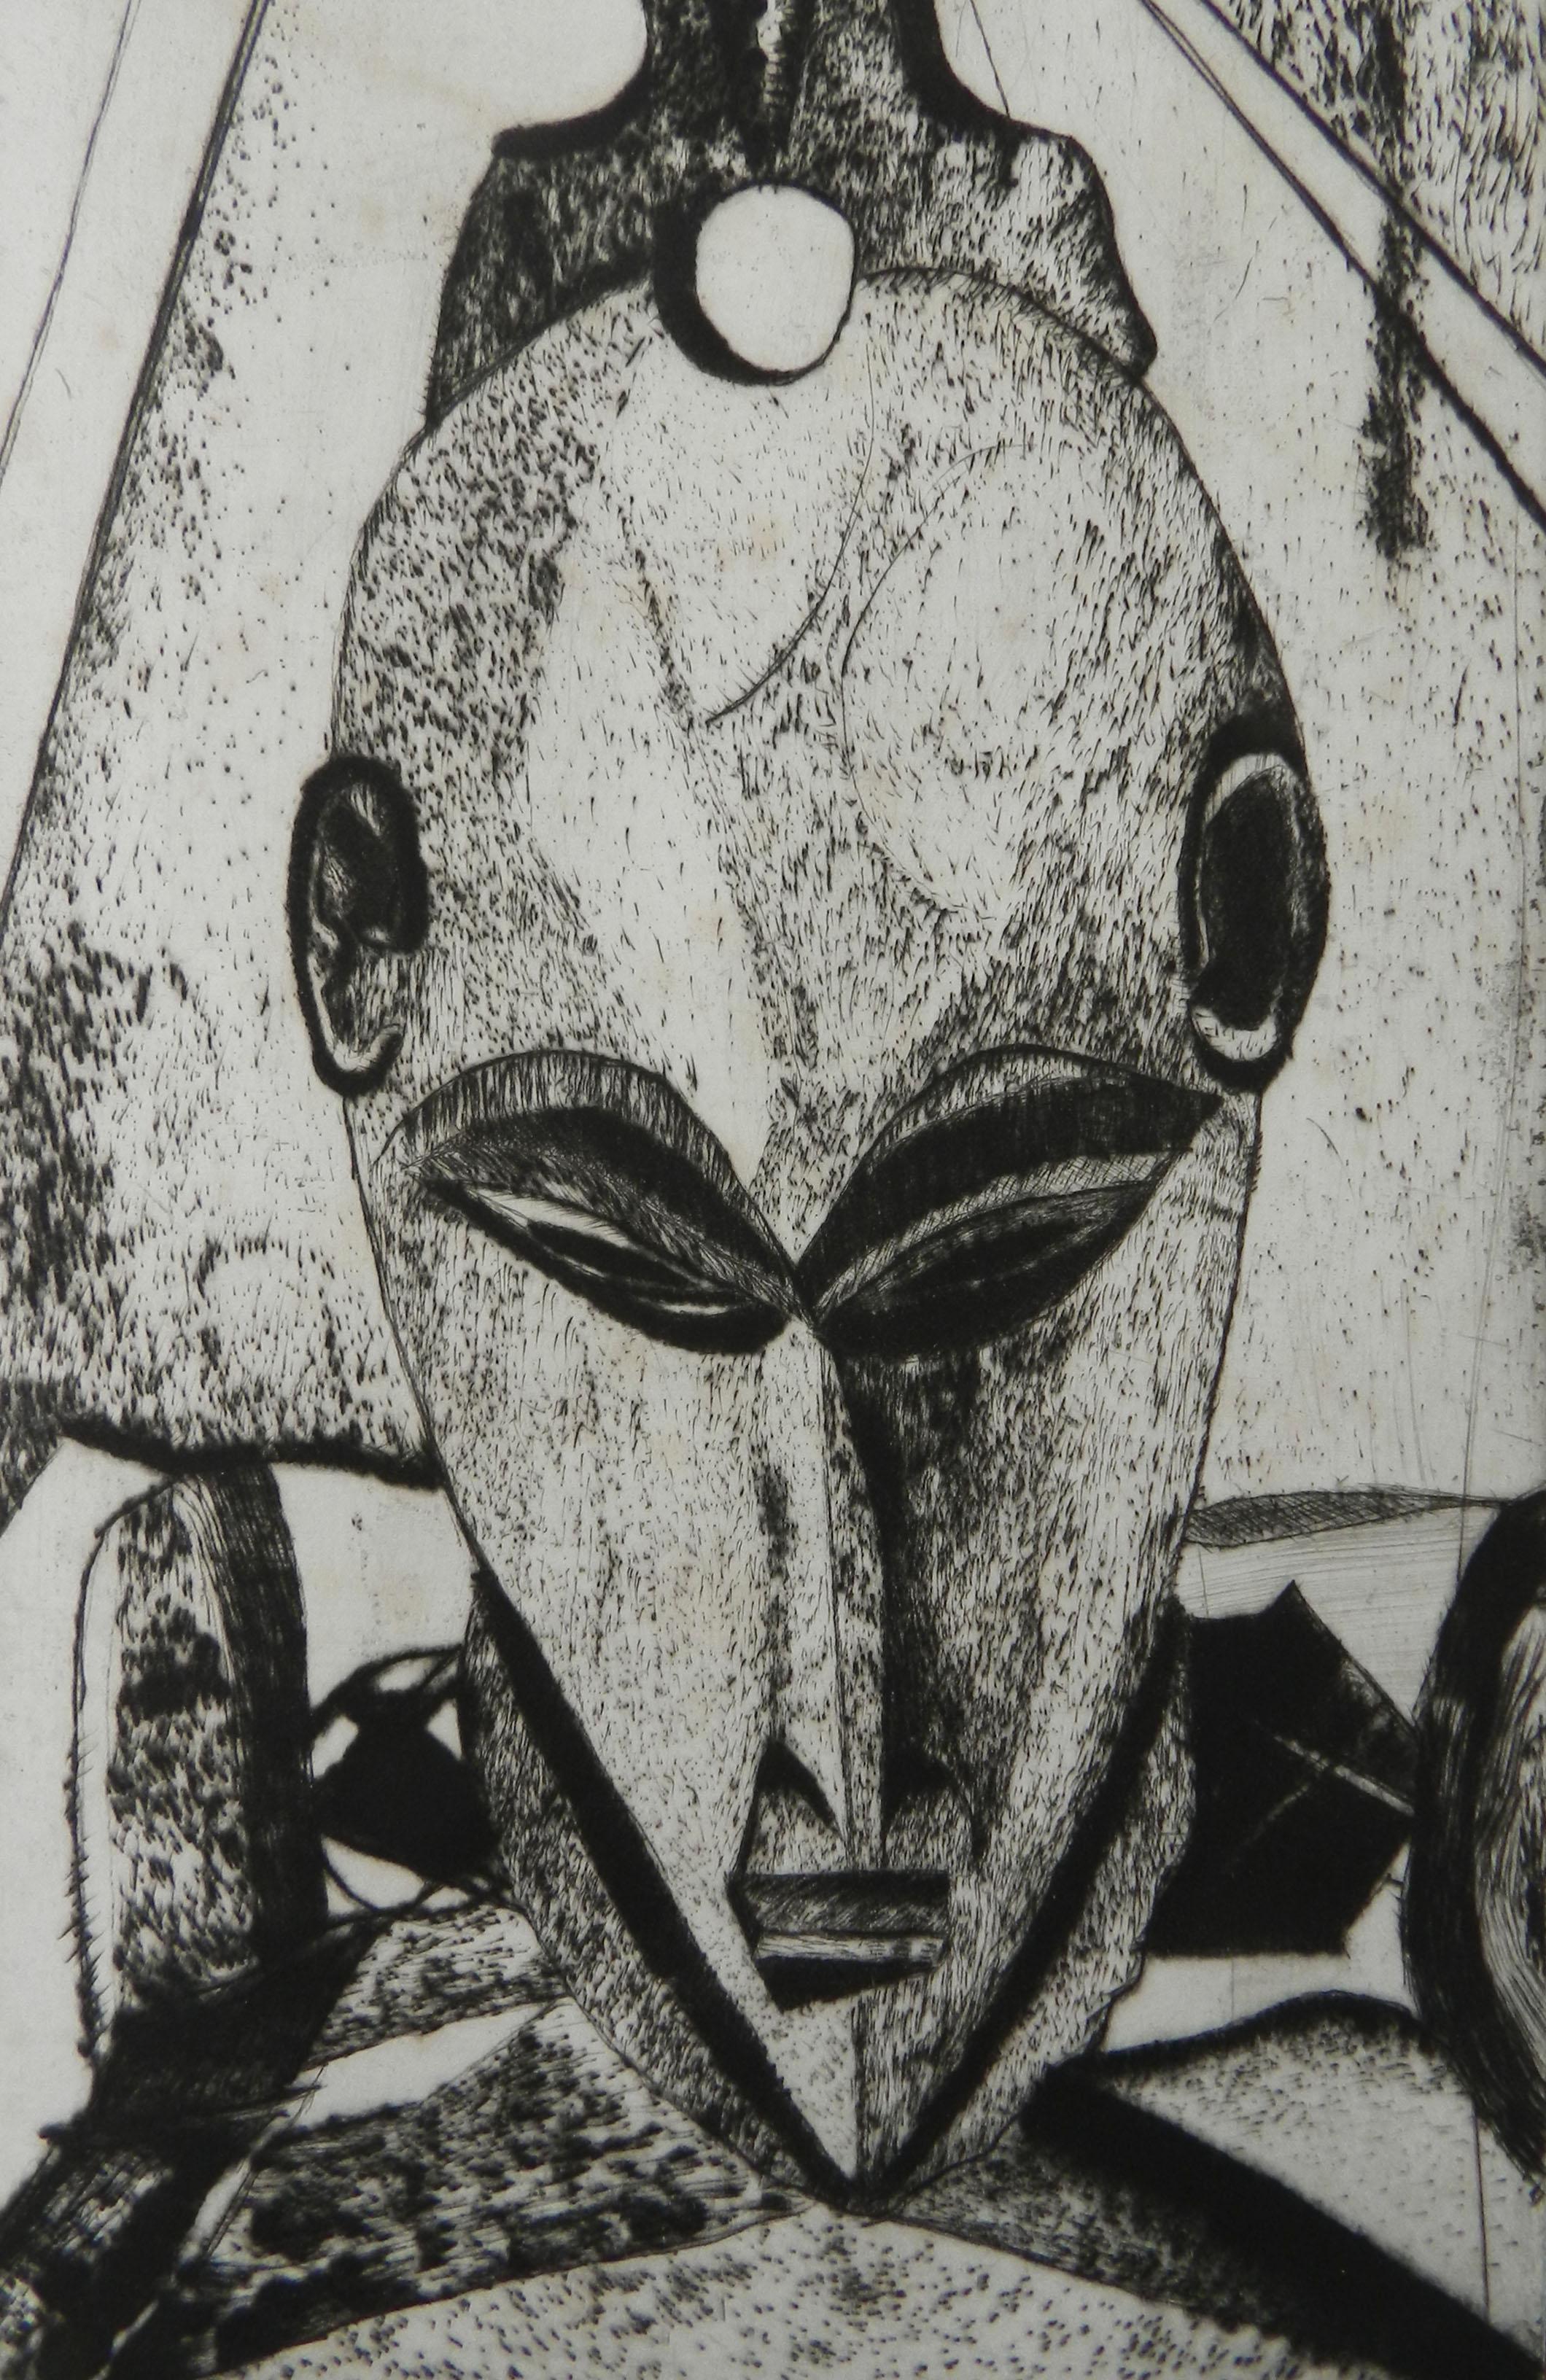 African Mask Lithograph by French 20th century signed
Limited edition this being number 4 of 20 and signed by the artist
In good vintage condition having always been framed with just general signs of aging not distracting
Paper size 21.5cms x